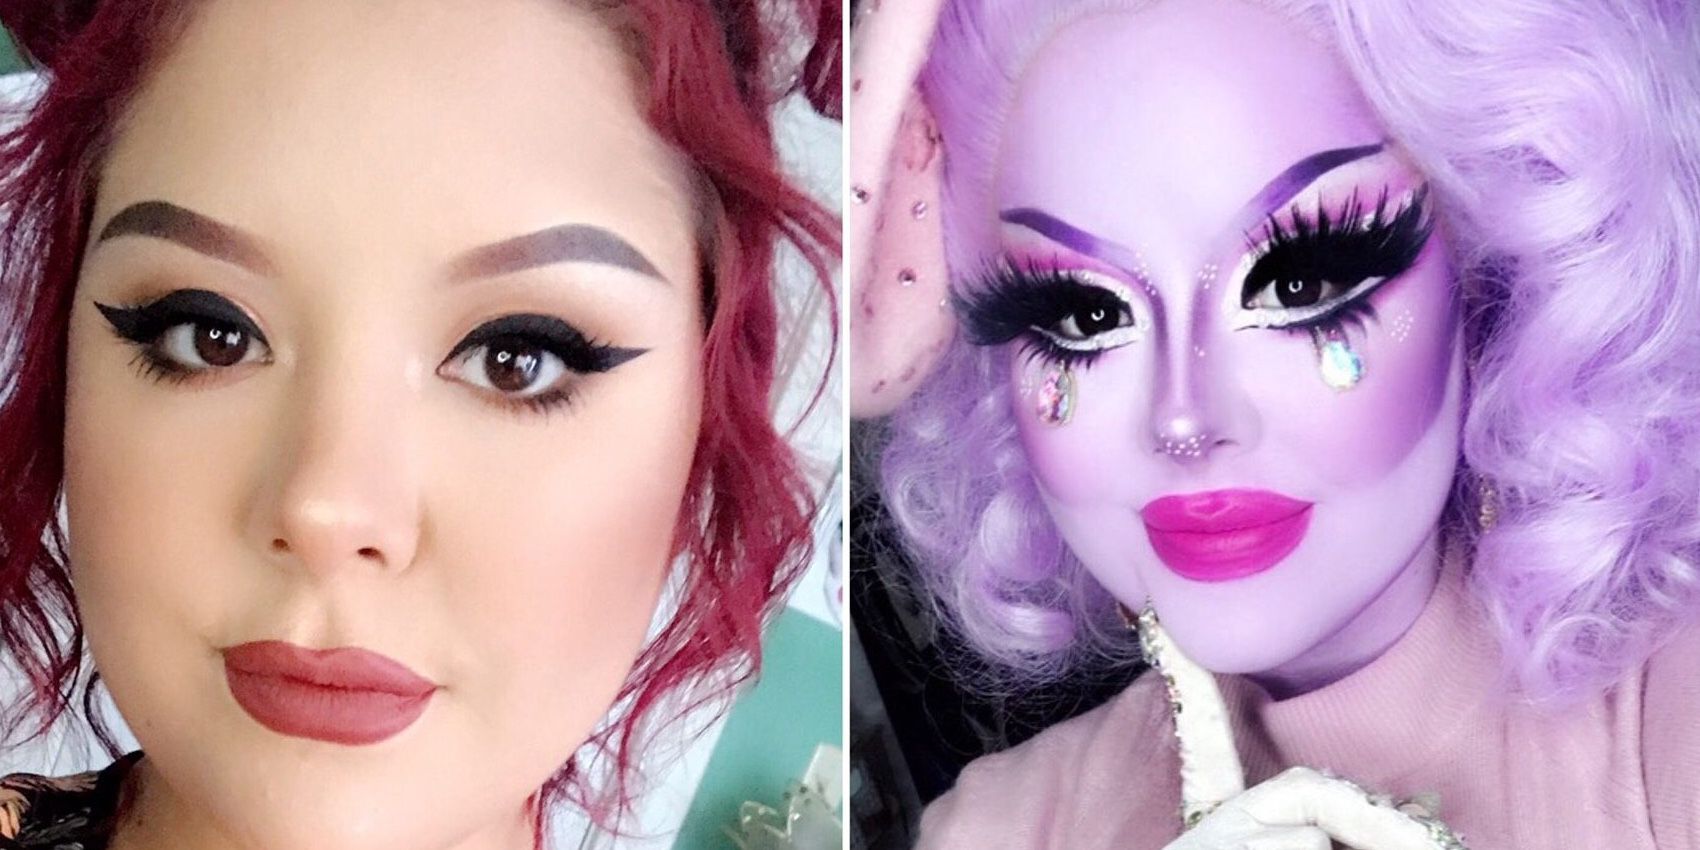 Drag queen Creme Fatale in and out of drag